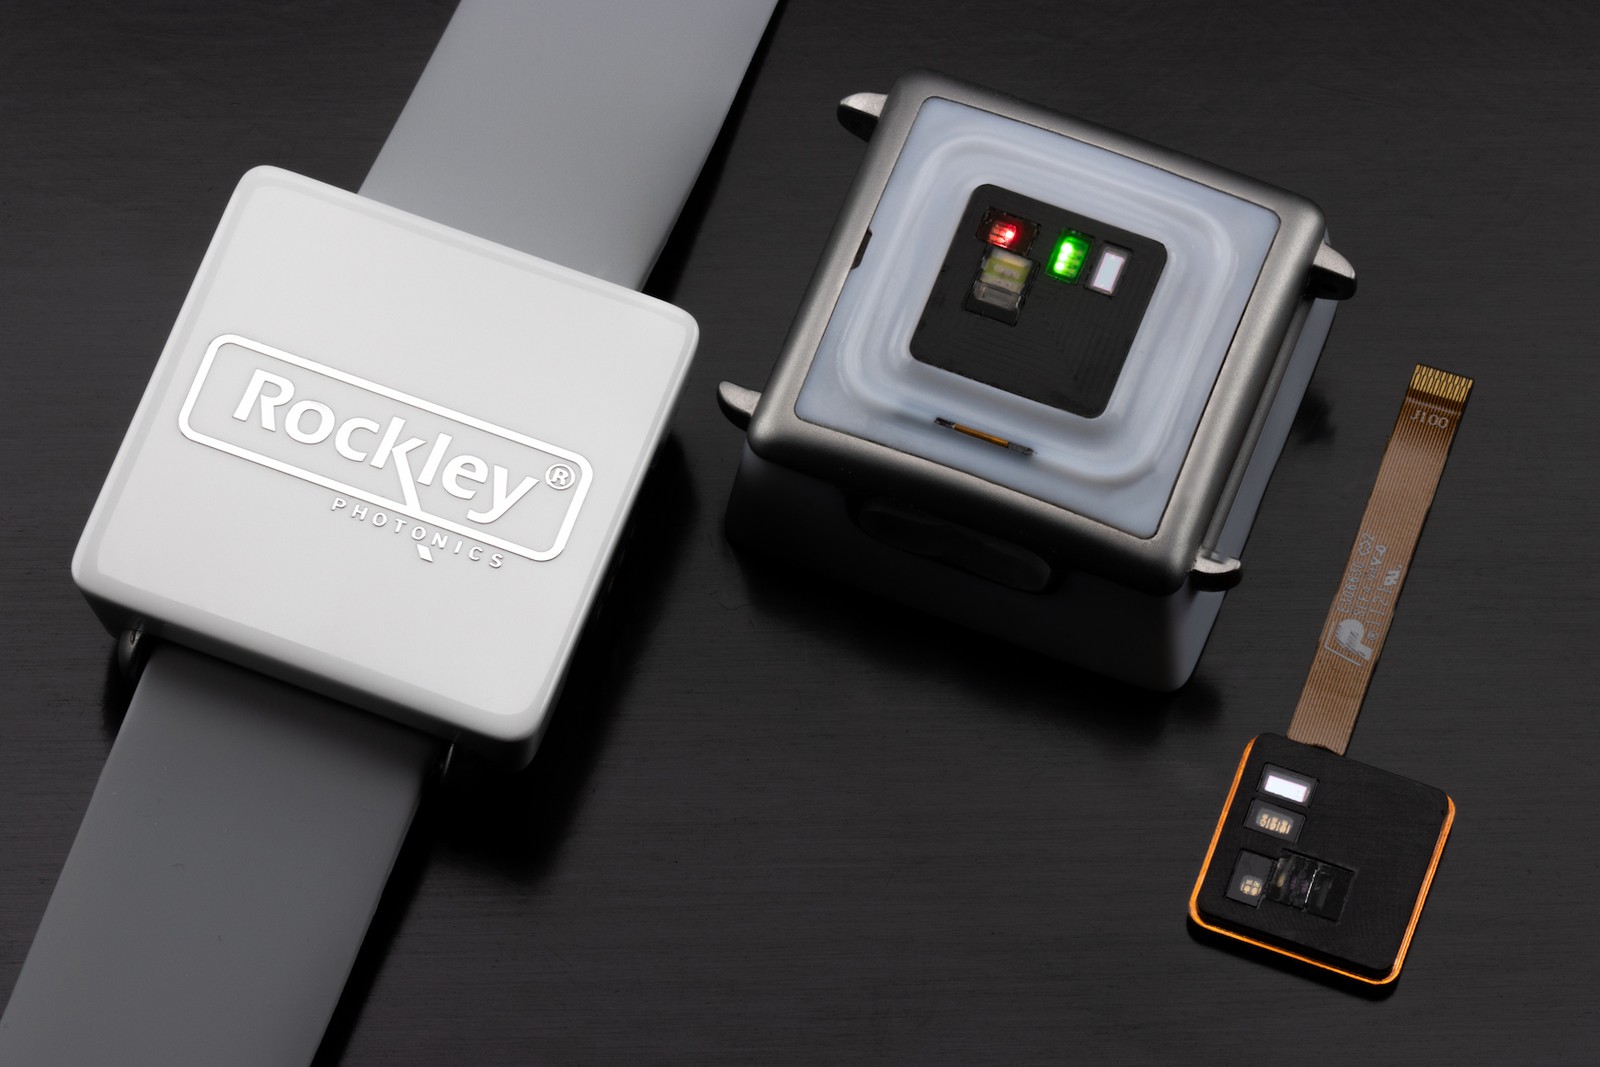 rockley blood glucose monitor for Apple Watch